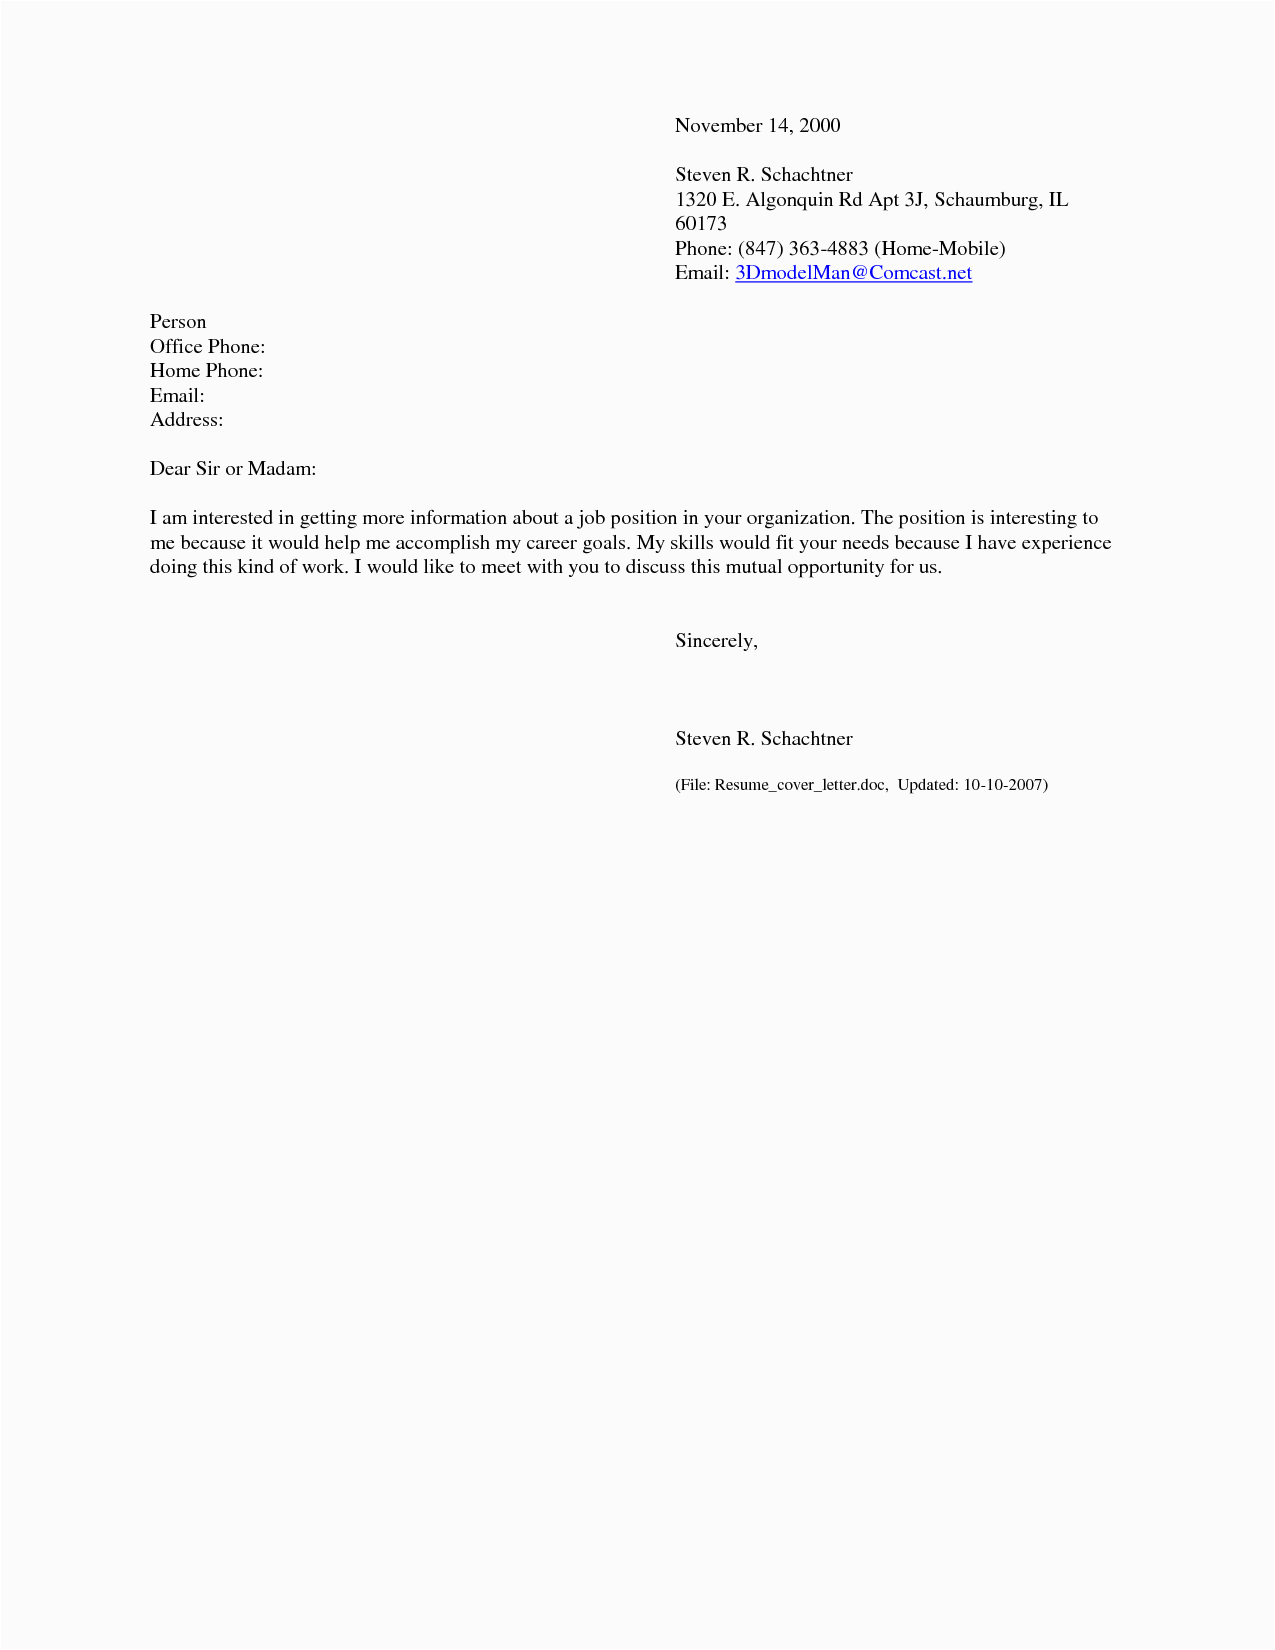 Email Cover Letter and Resume Sample Cover Letter for Emailing Resume Database